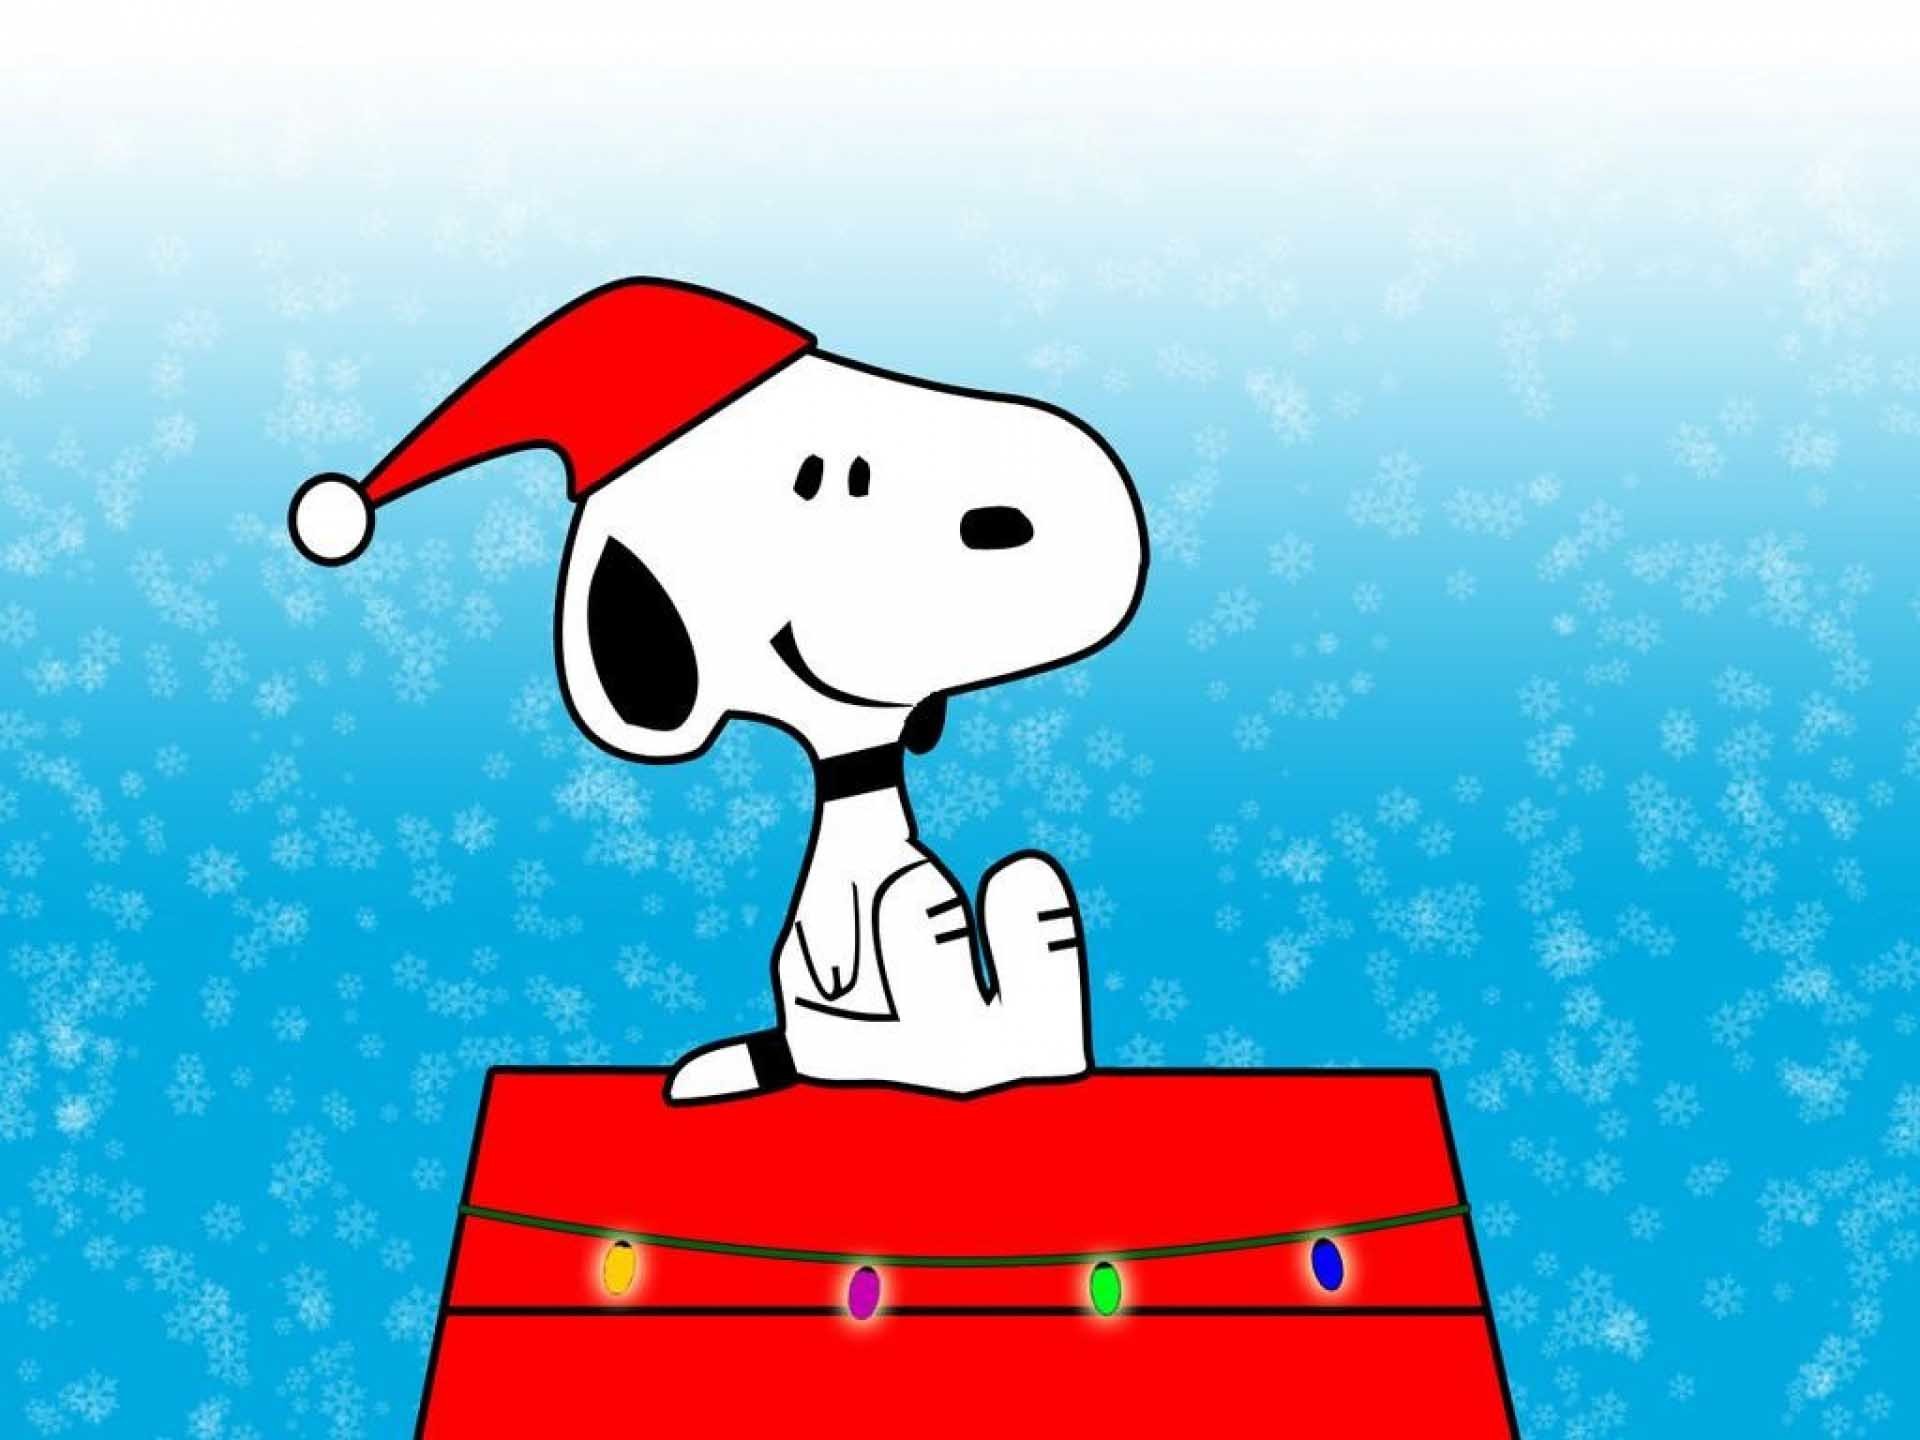 1920x1440 Charlie Brown Christmas Background HD - Page 2 of 3 - wallpaper.wiki